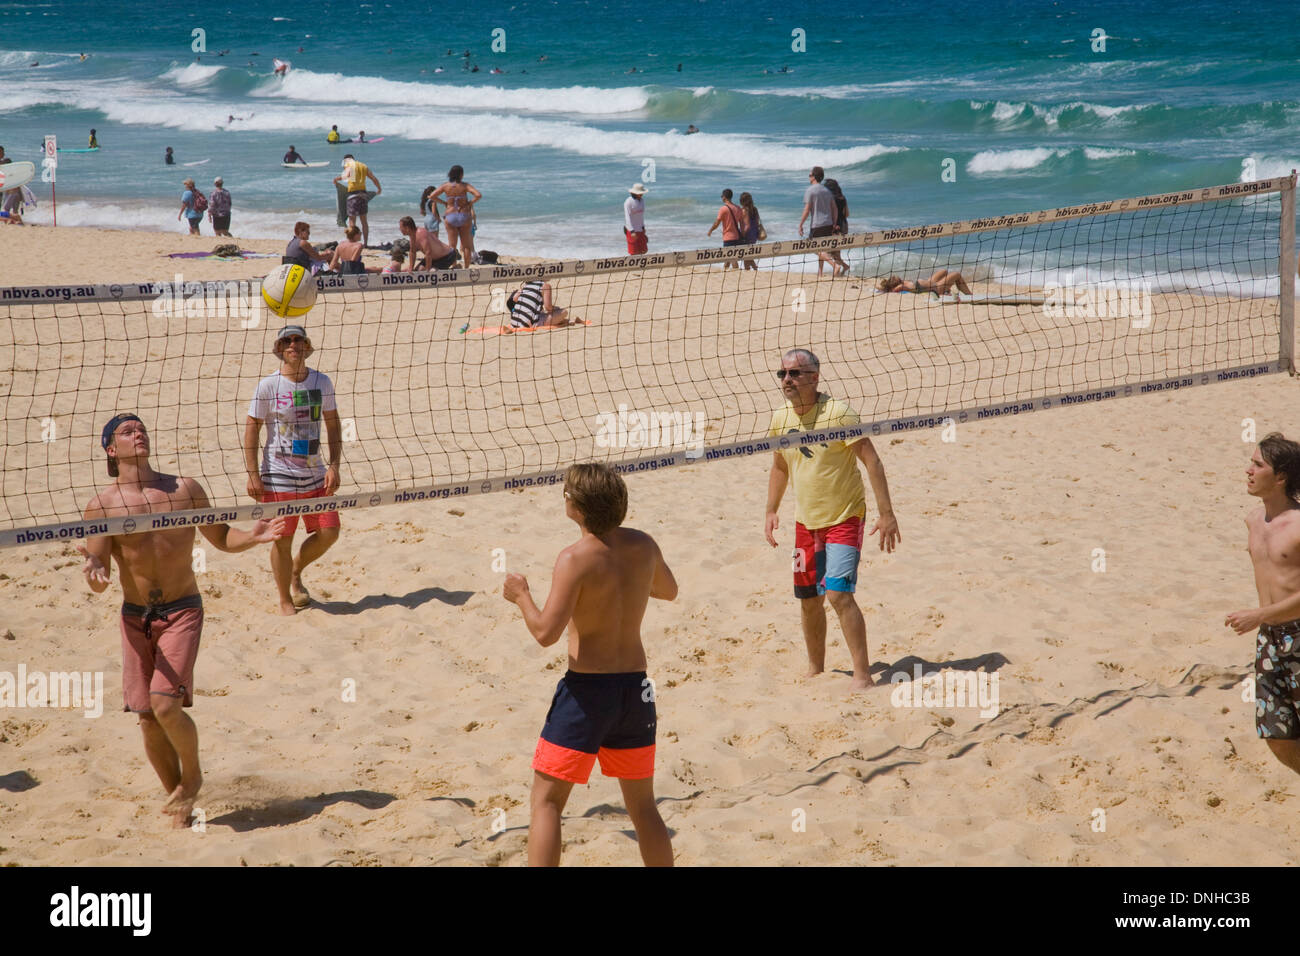 young men playing beach volleyball on manly beach in sydney,australia Stock Photo